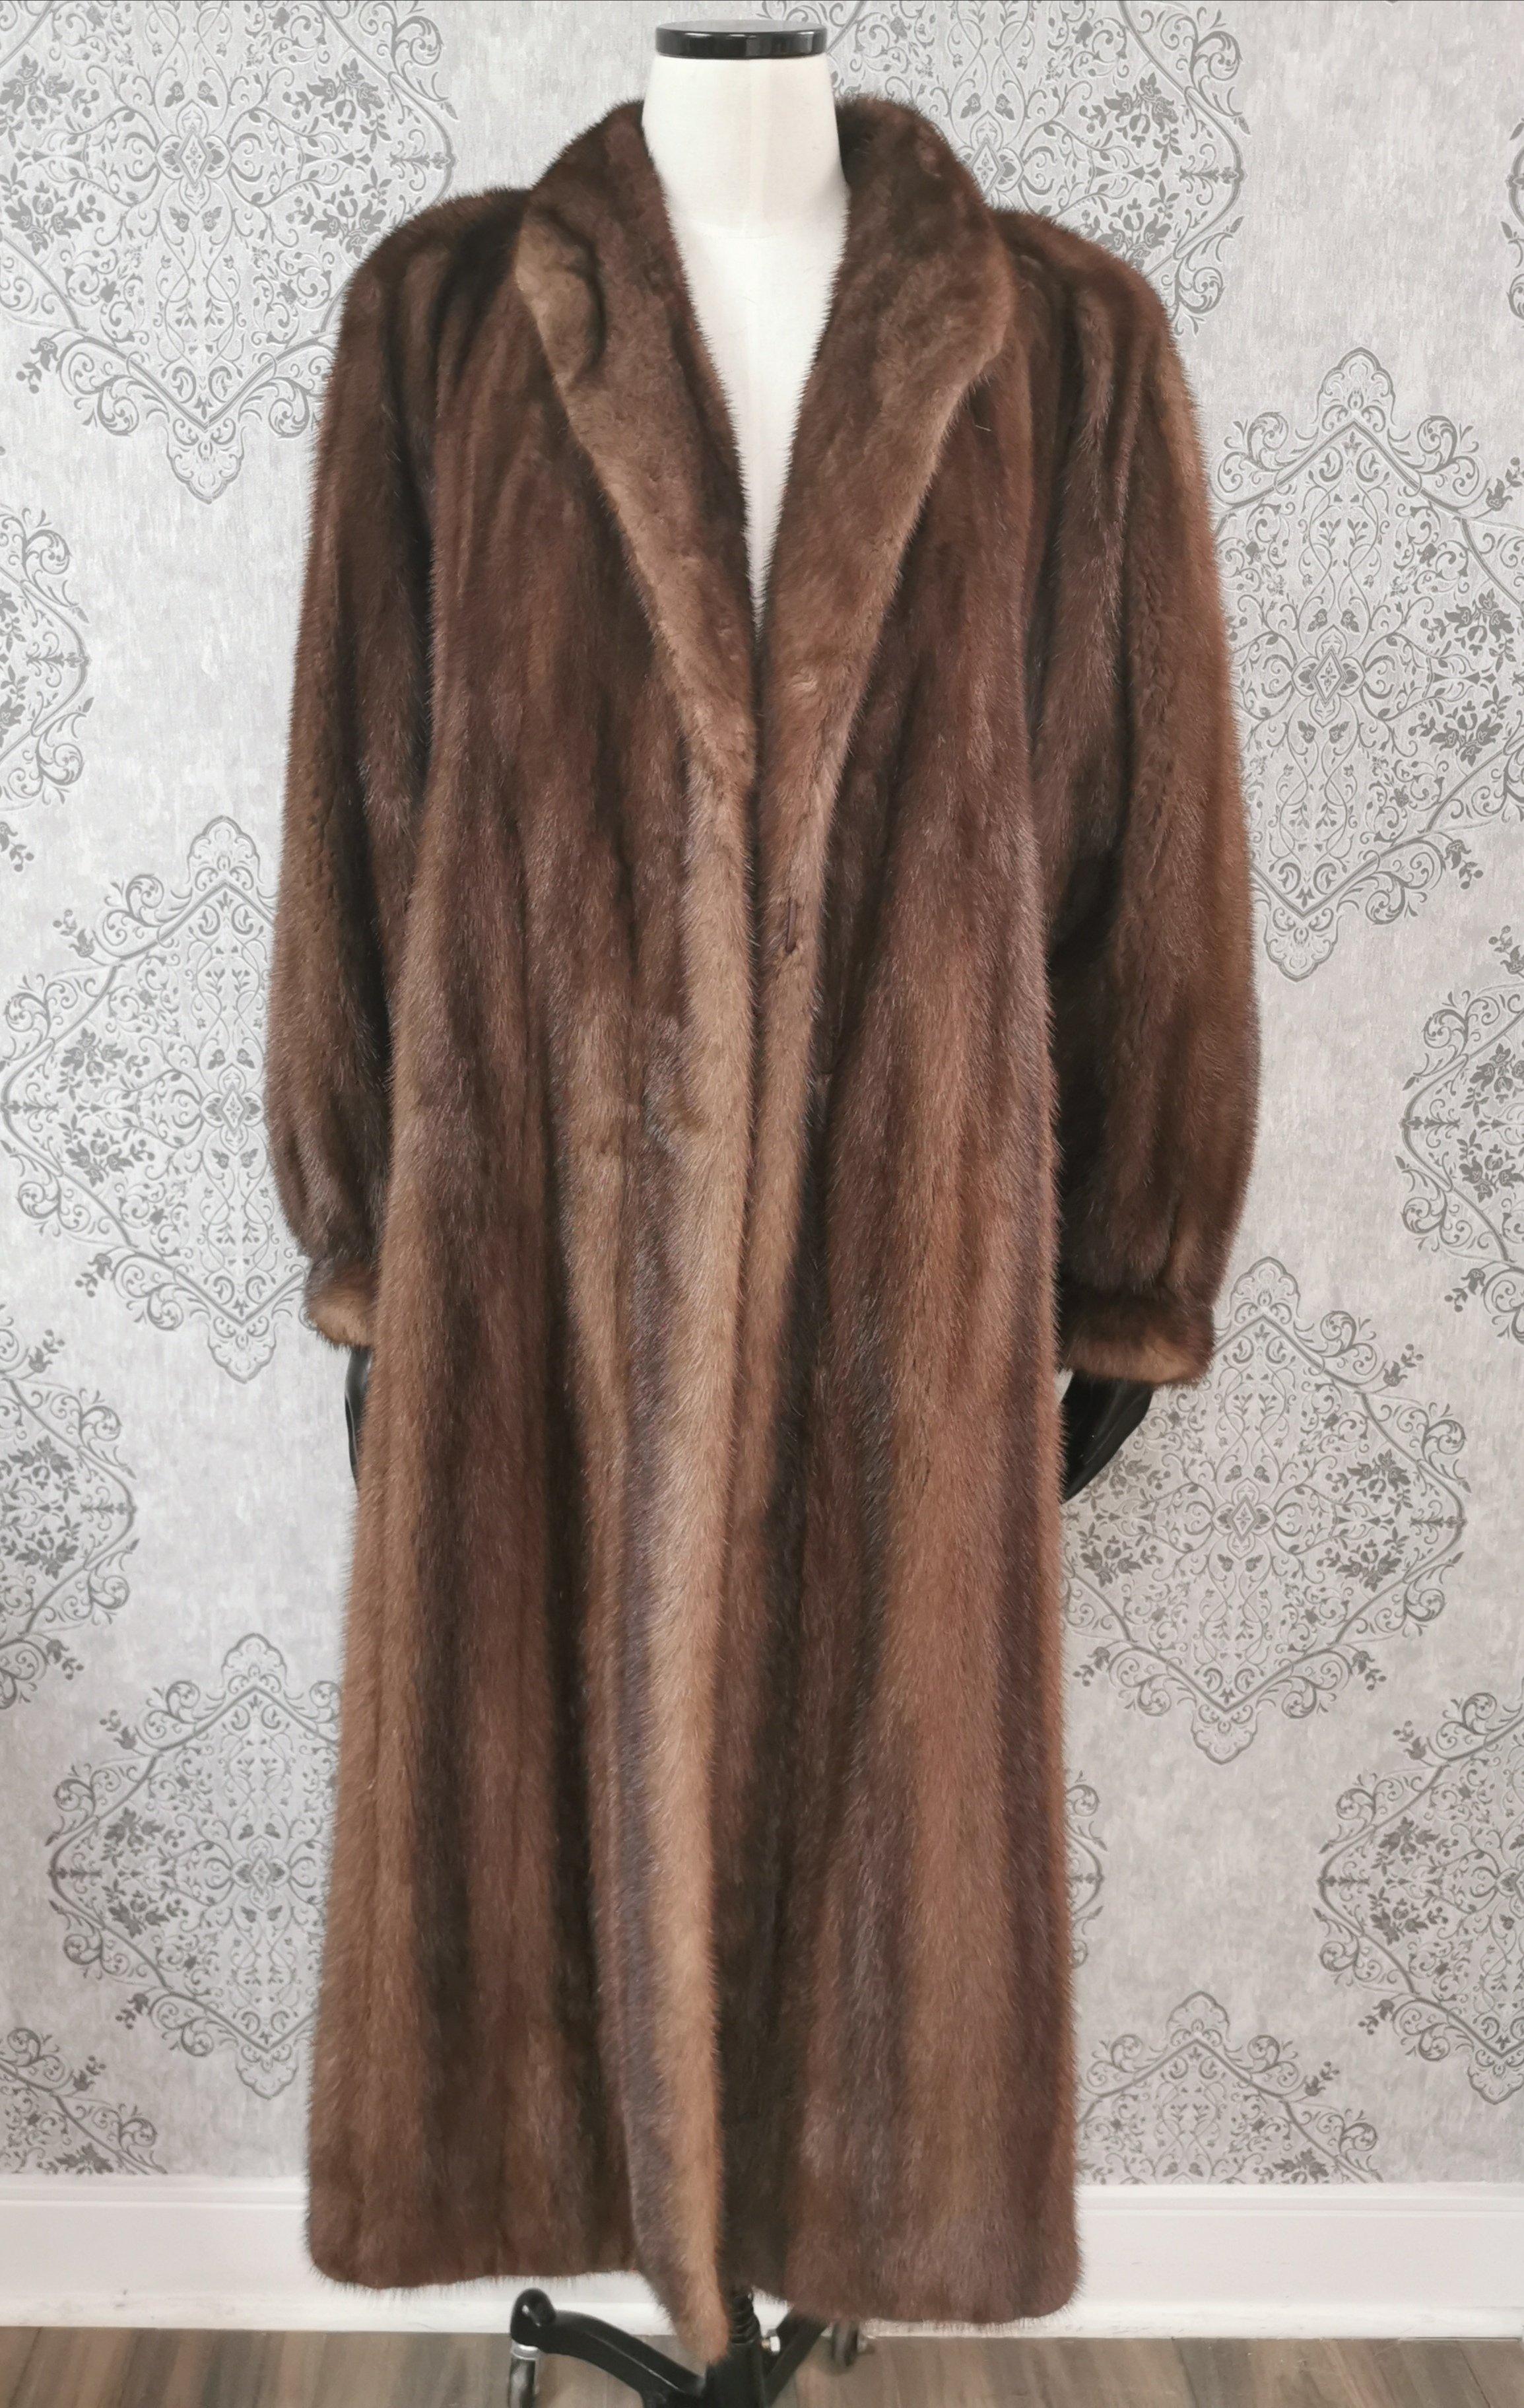 Givenchy Haute Fourrures Demi Buff with Female Mink Fur Coat in excellent condition (Size 12 - M)

Portrait collar with princess cuffs and European German clasps for closure, two slit side pockets and full silk satin lining. 

Made in